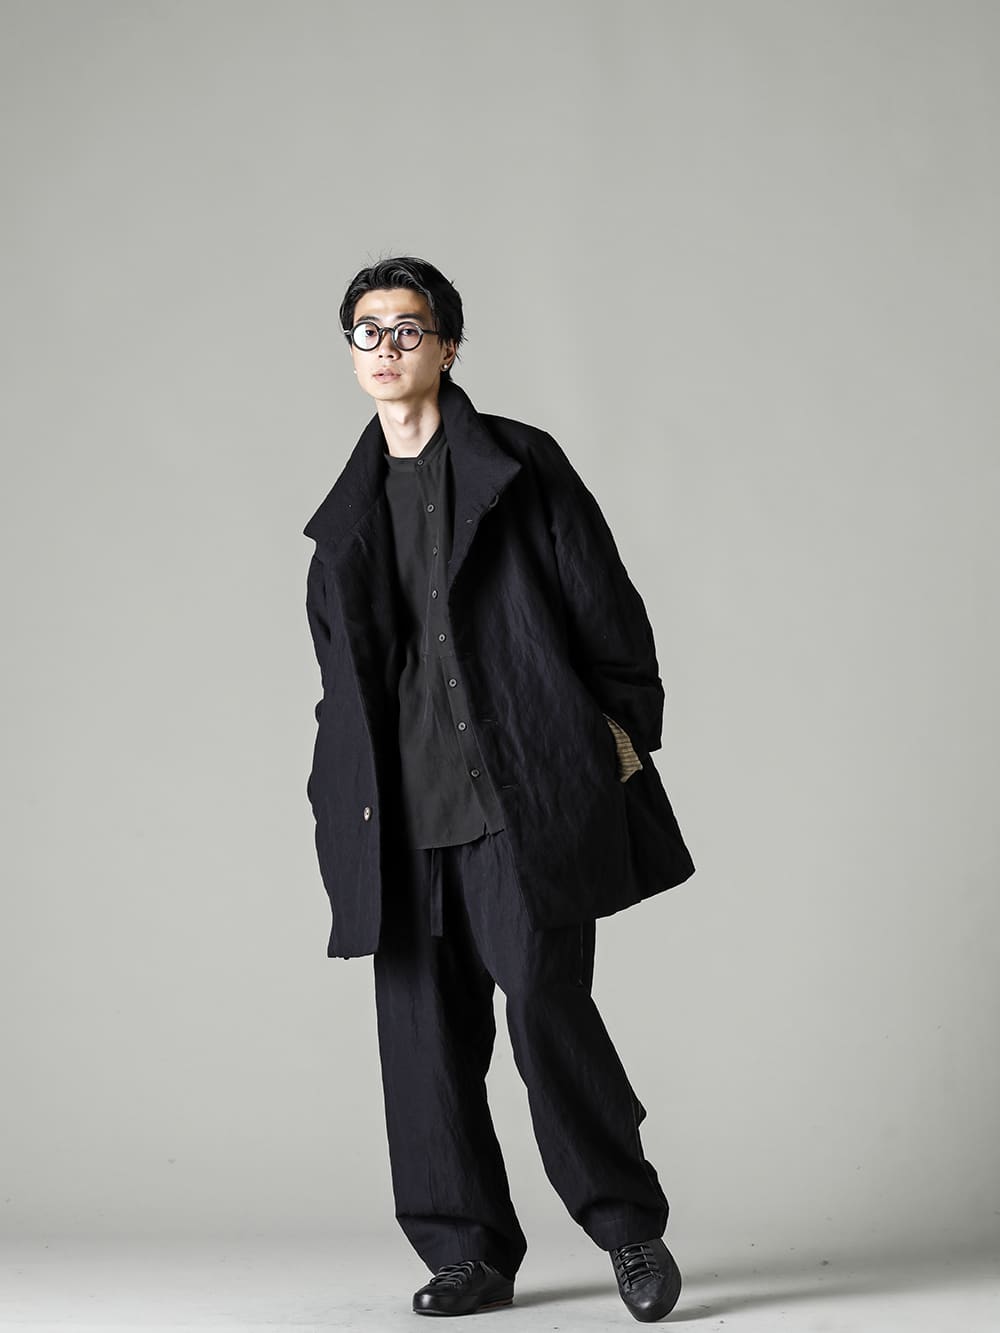 New Arrivals] ZIGGY CHEN 22-23AW 1st Delivery! - FASCINATE BLOG